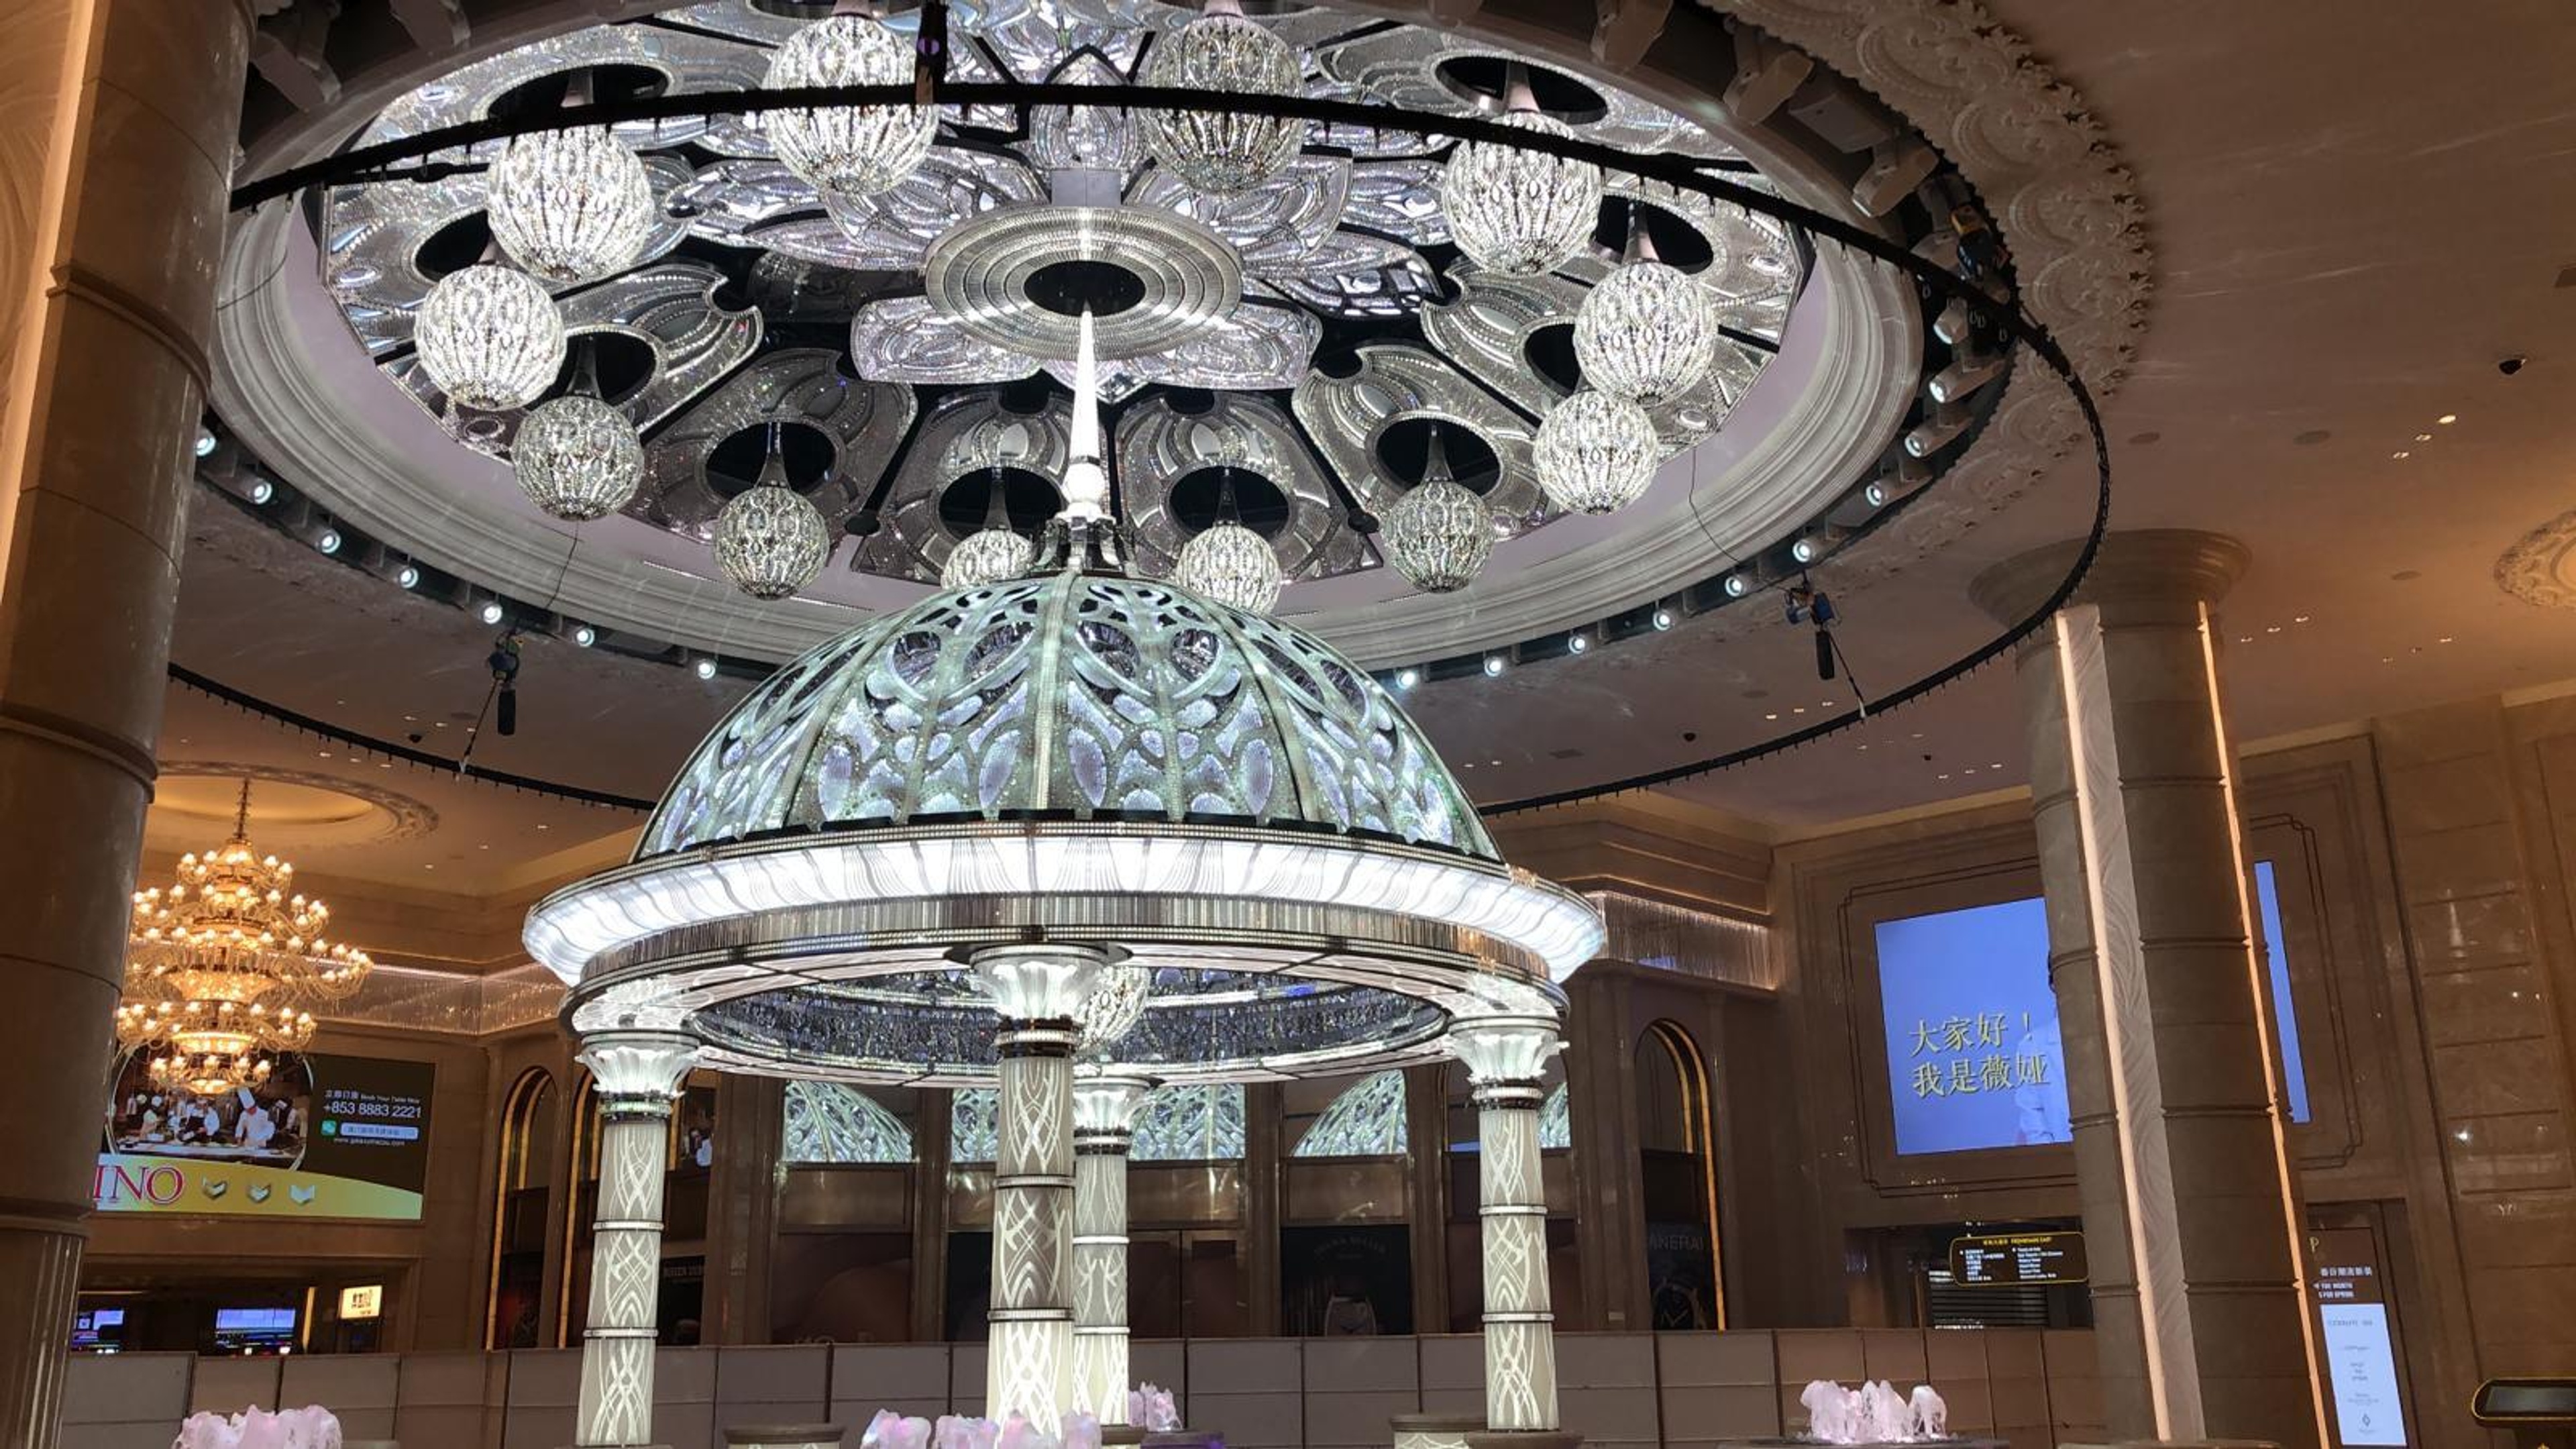 Architectural kinetic Lous flower sculpture installed in centre of grand lobby with chandeliers and light displays